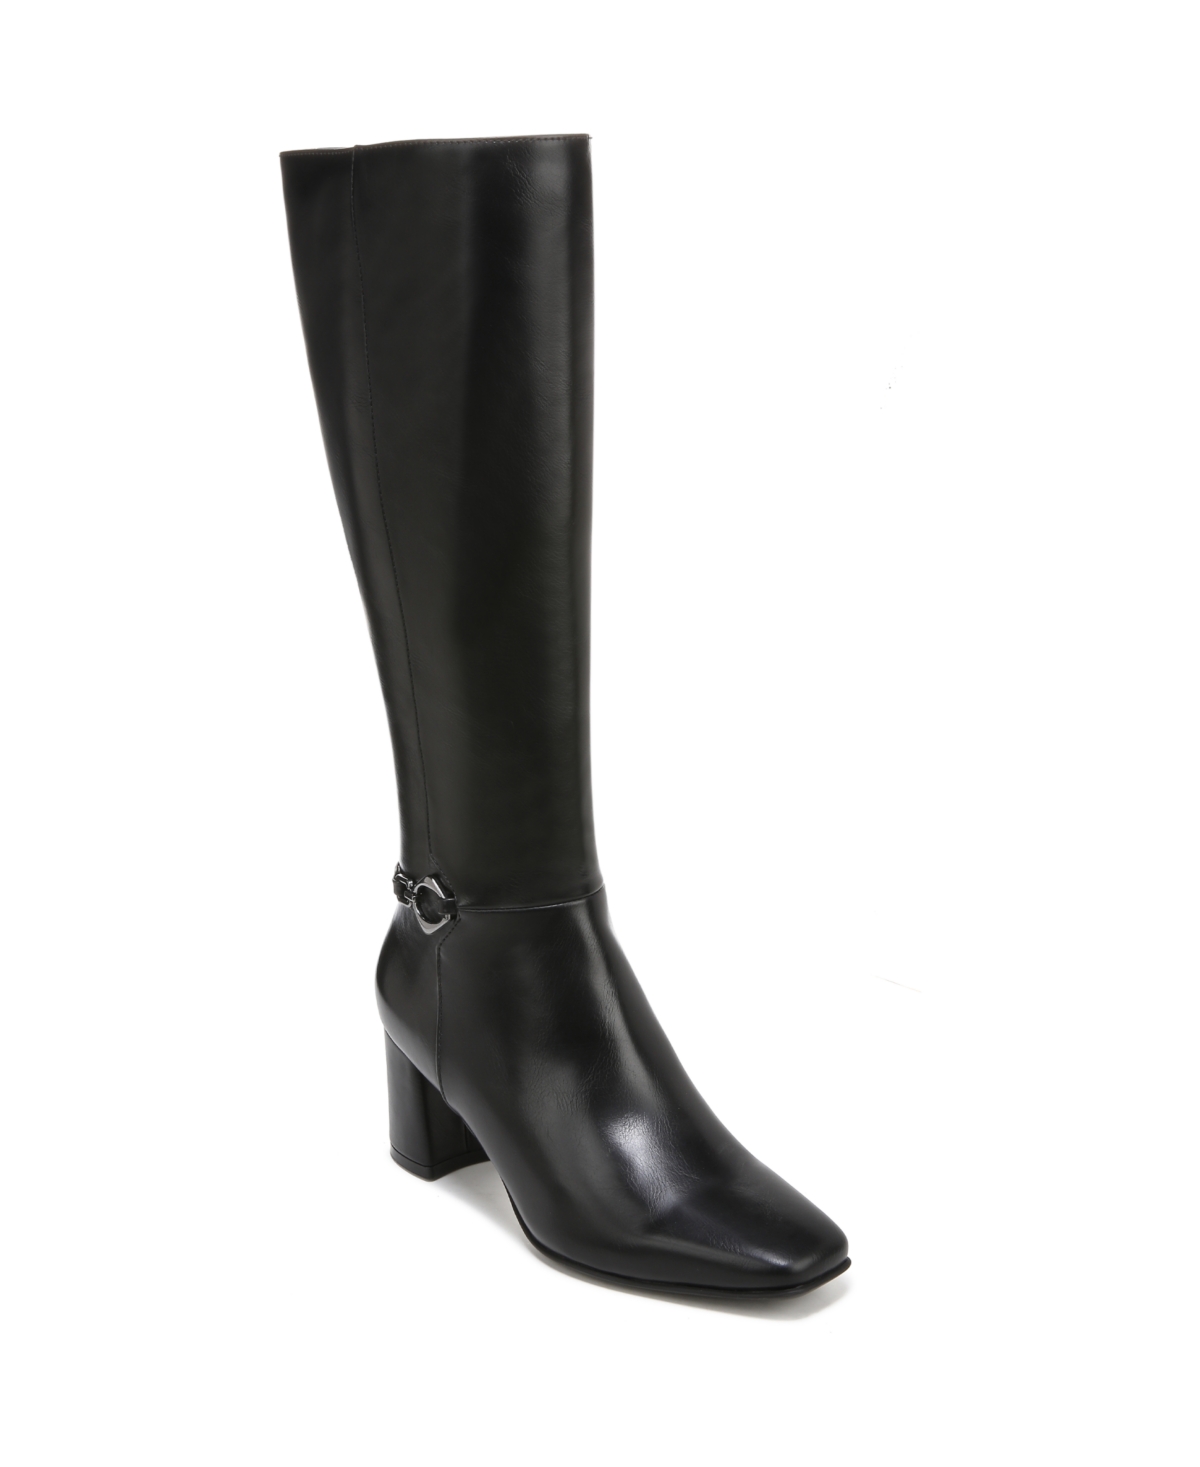 Naturalizer Waylon Narrow Calf Tall Dress Boots In Black Faux Leather